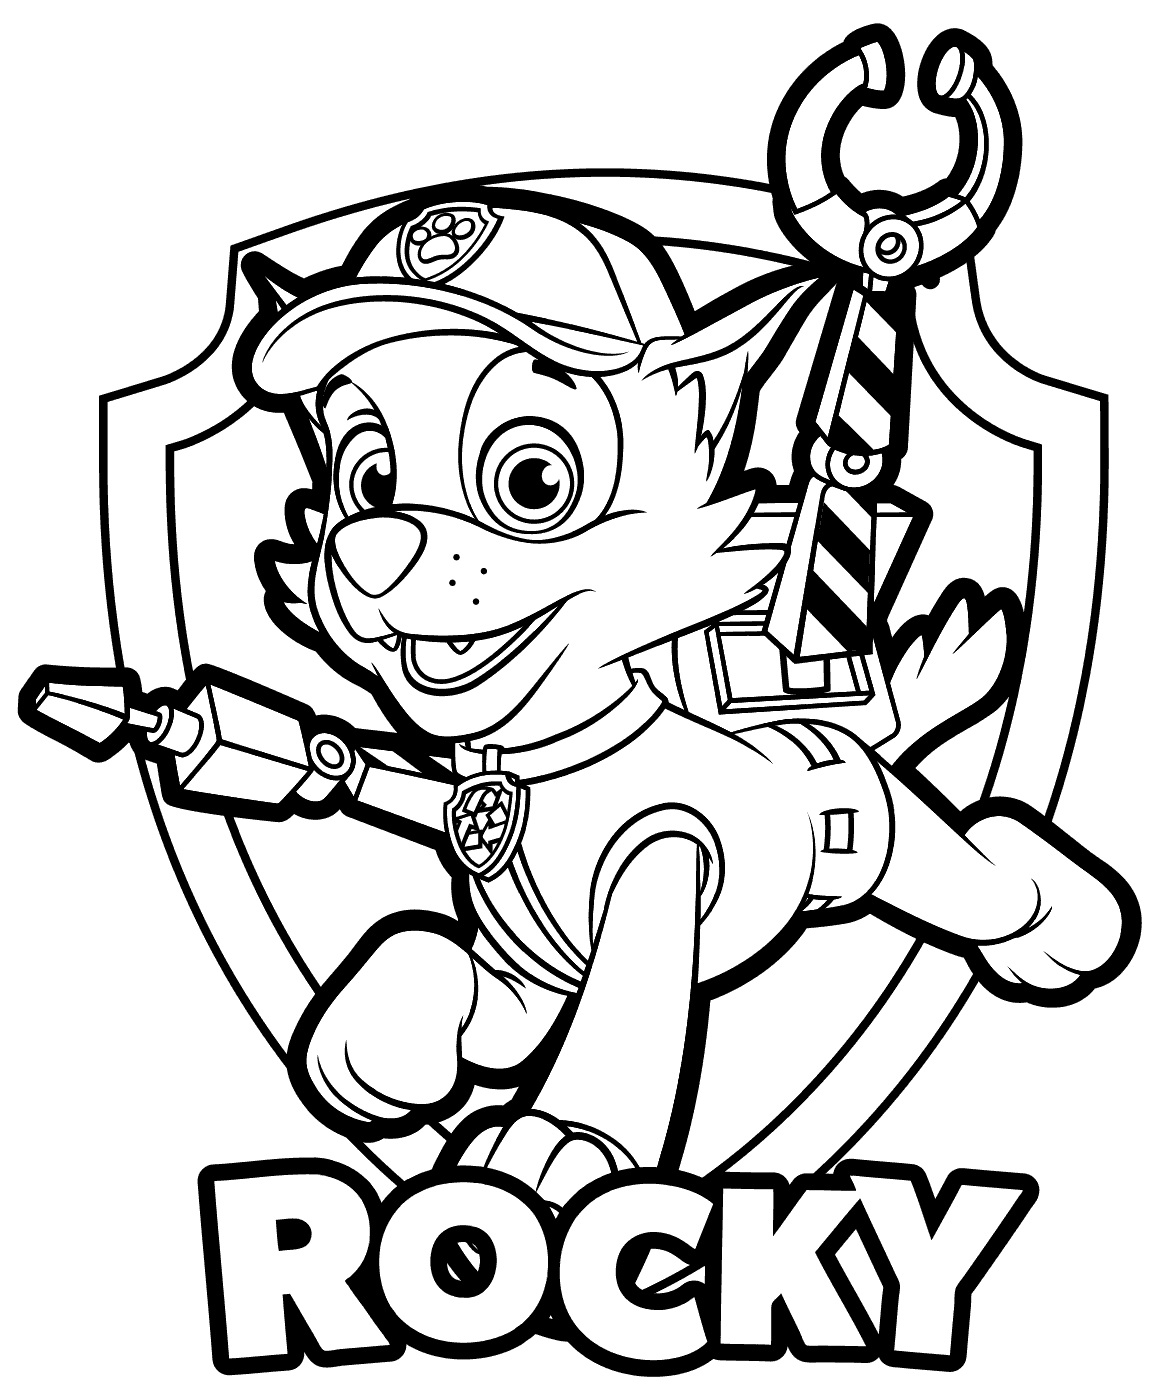 Paw Patrol Coloring Pages | Free download on ClipArtMag